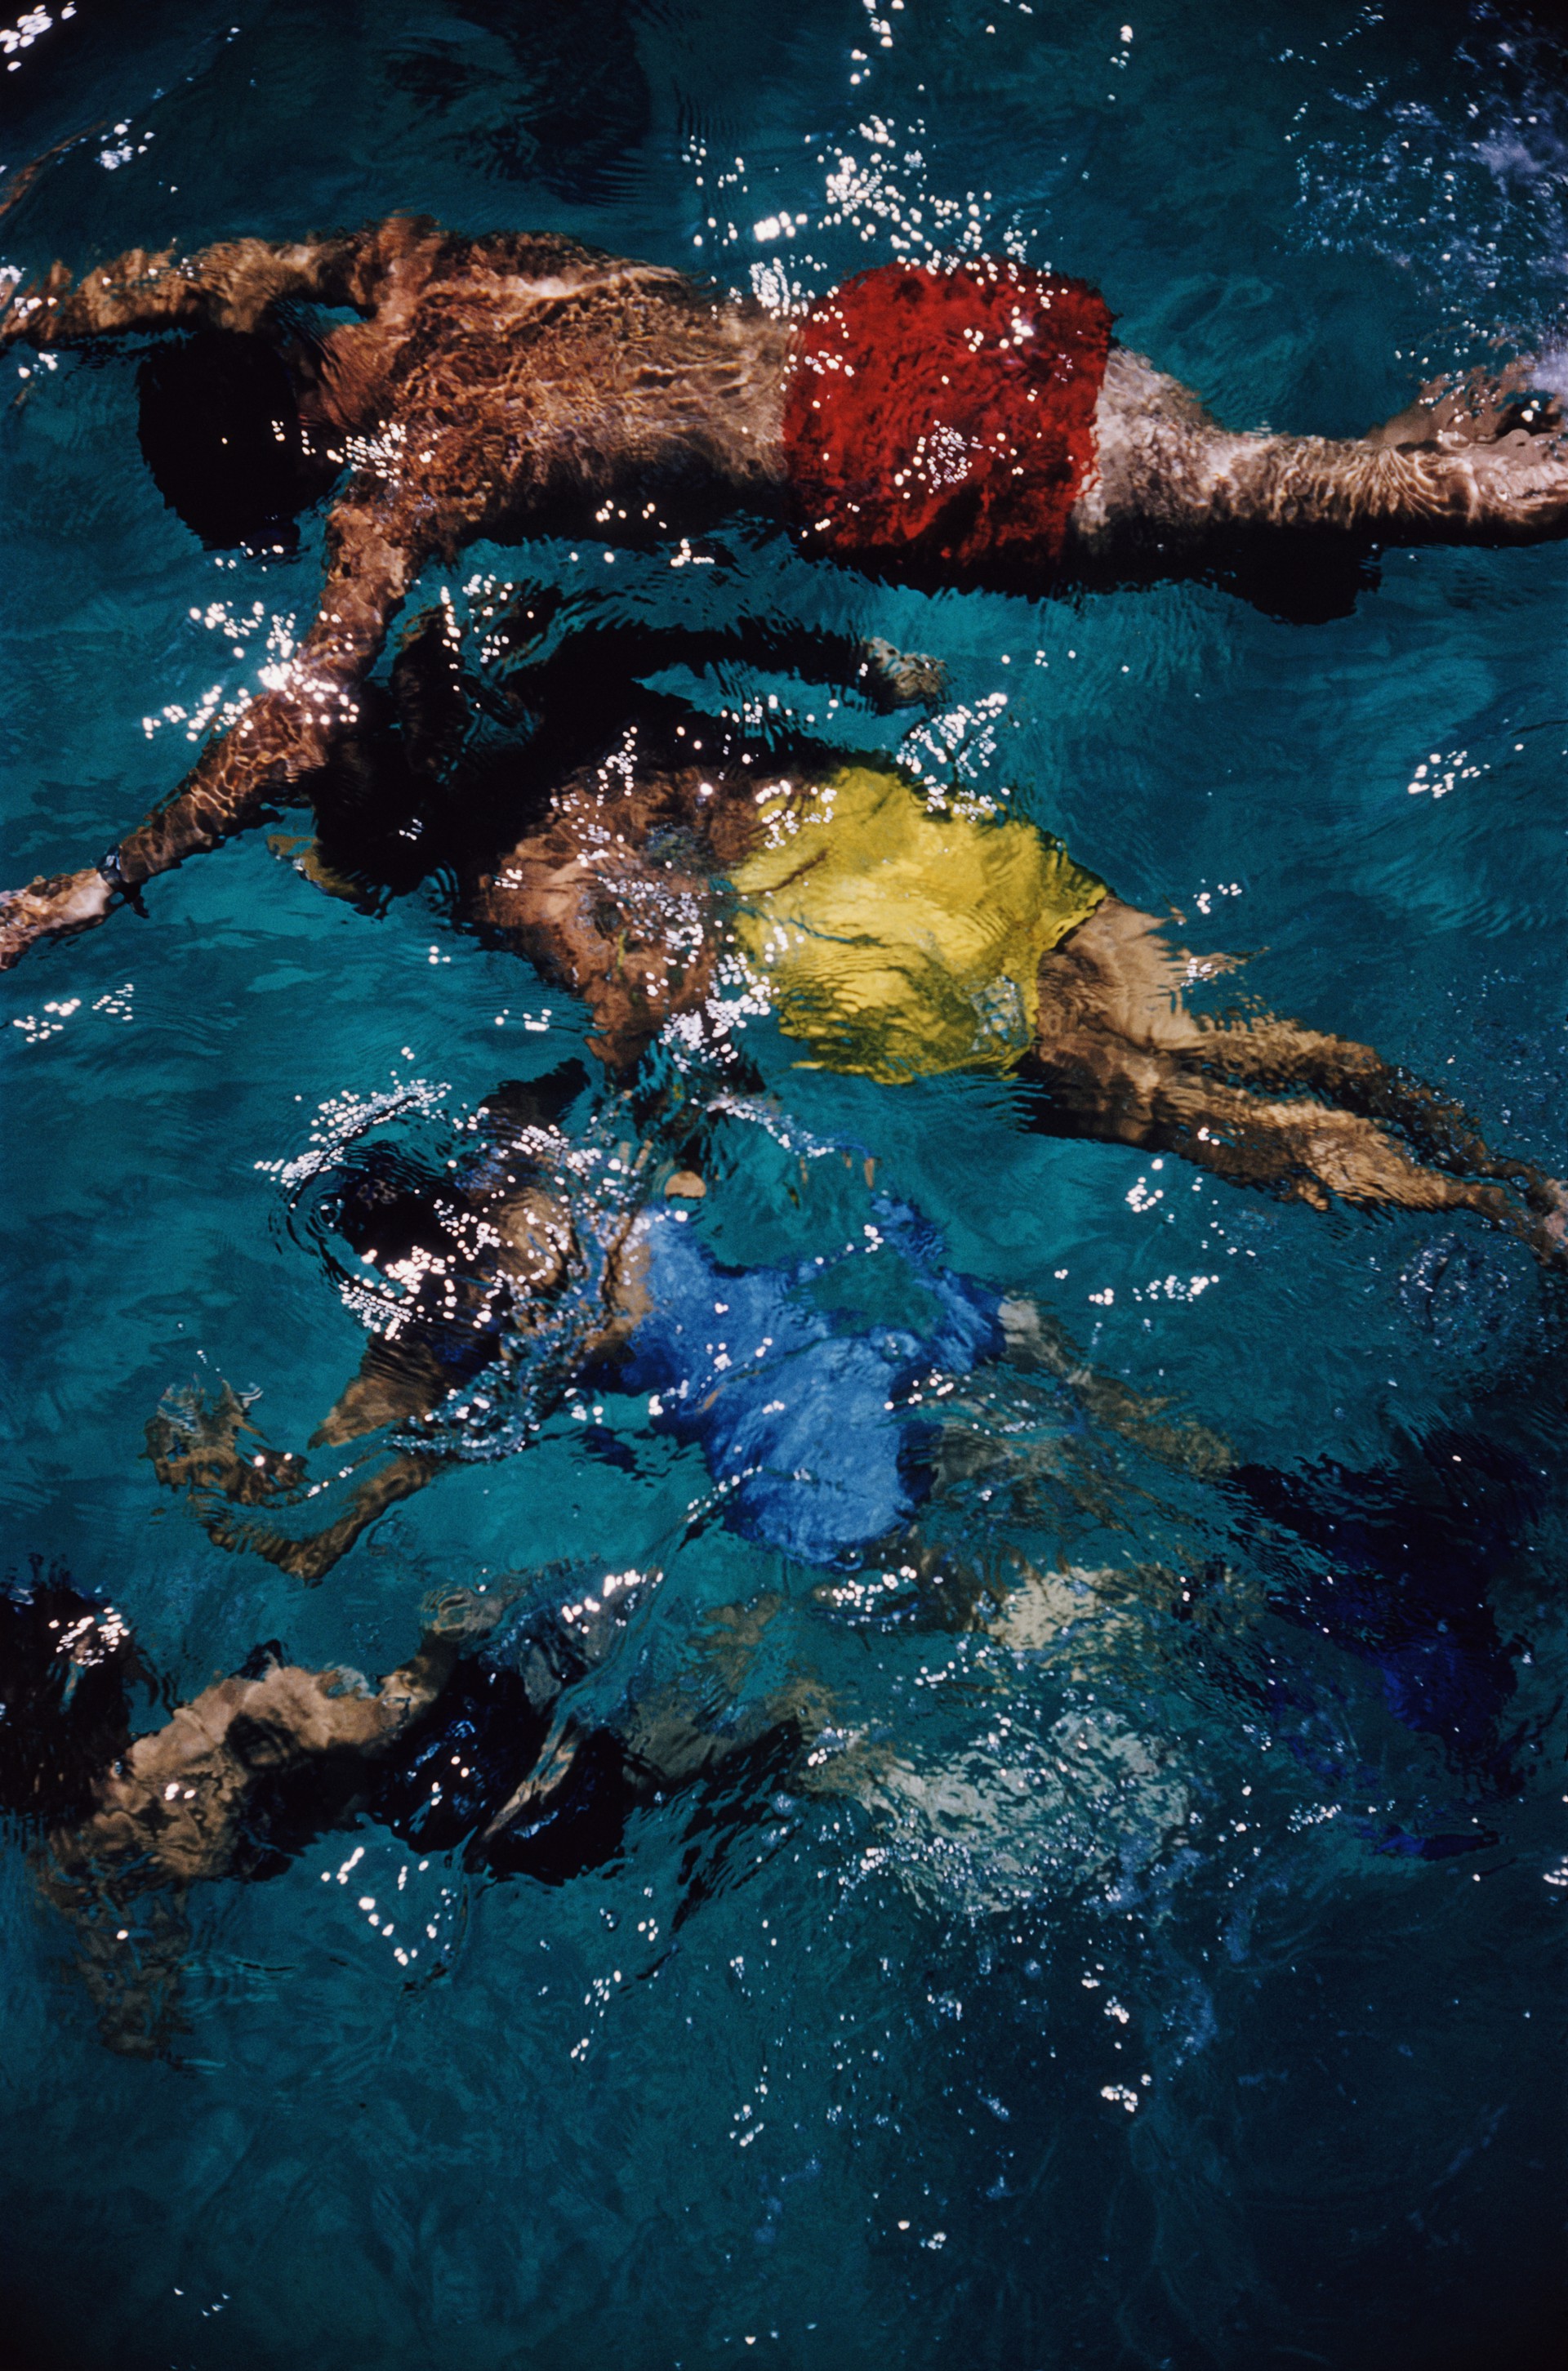 Swimming In The Bahamas by Slim Aarons